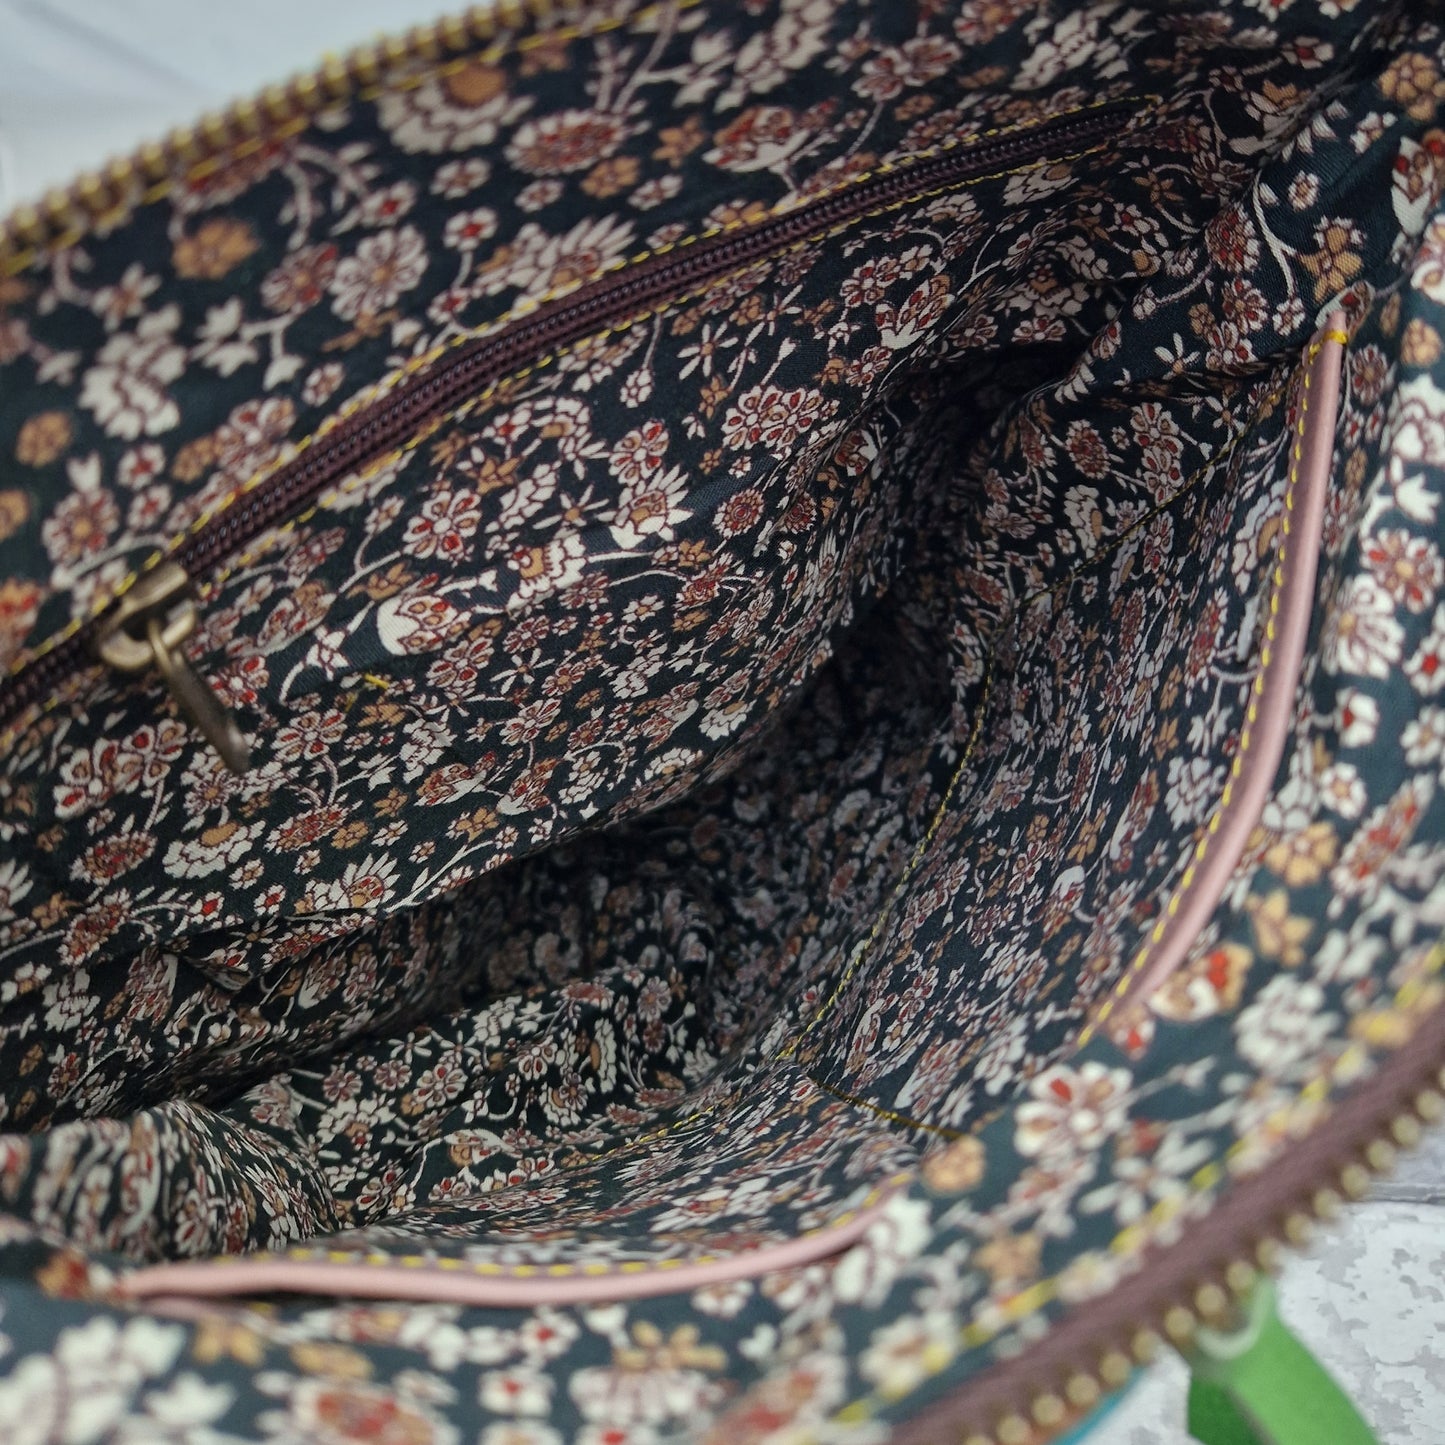 Floral lined interior of leather back pack.